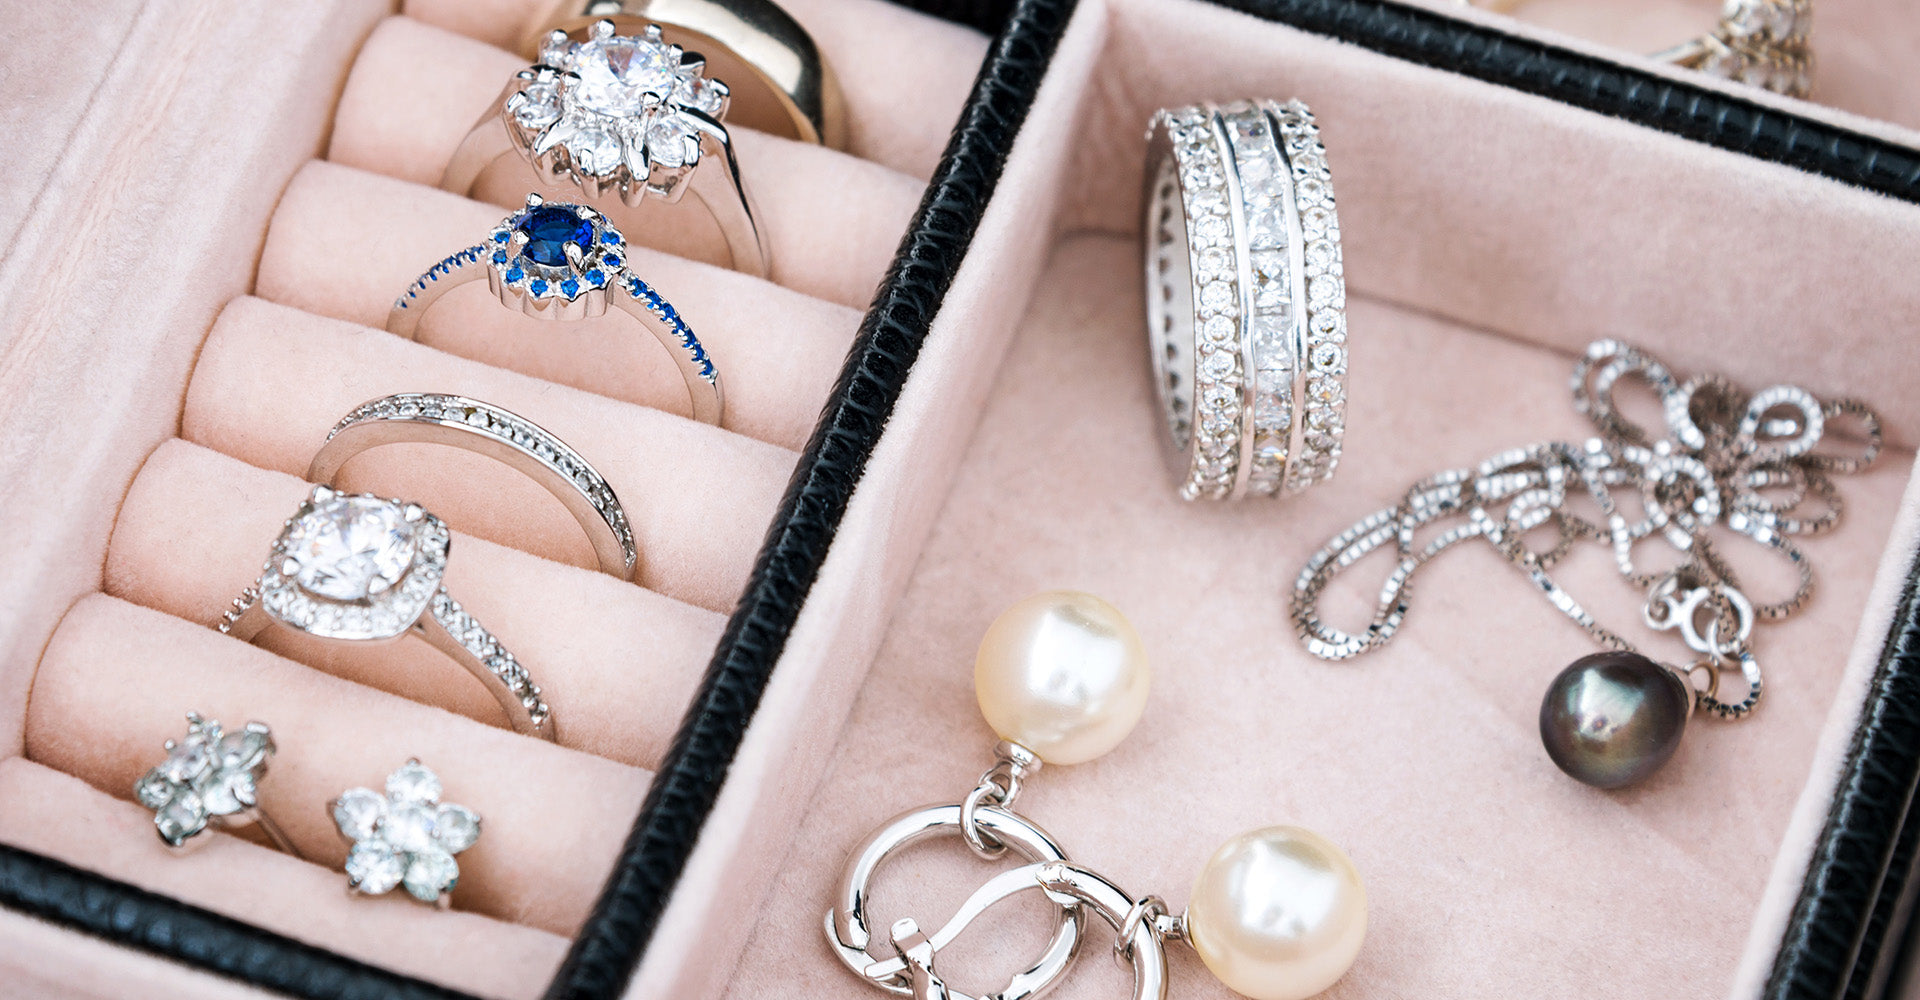 White Gold Jewelry - Read this BEFORE you buy!